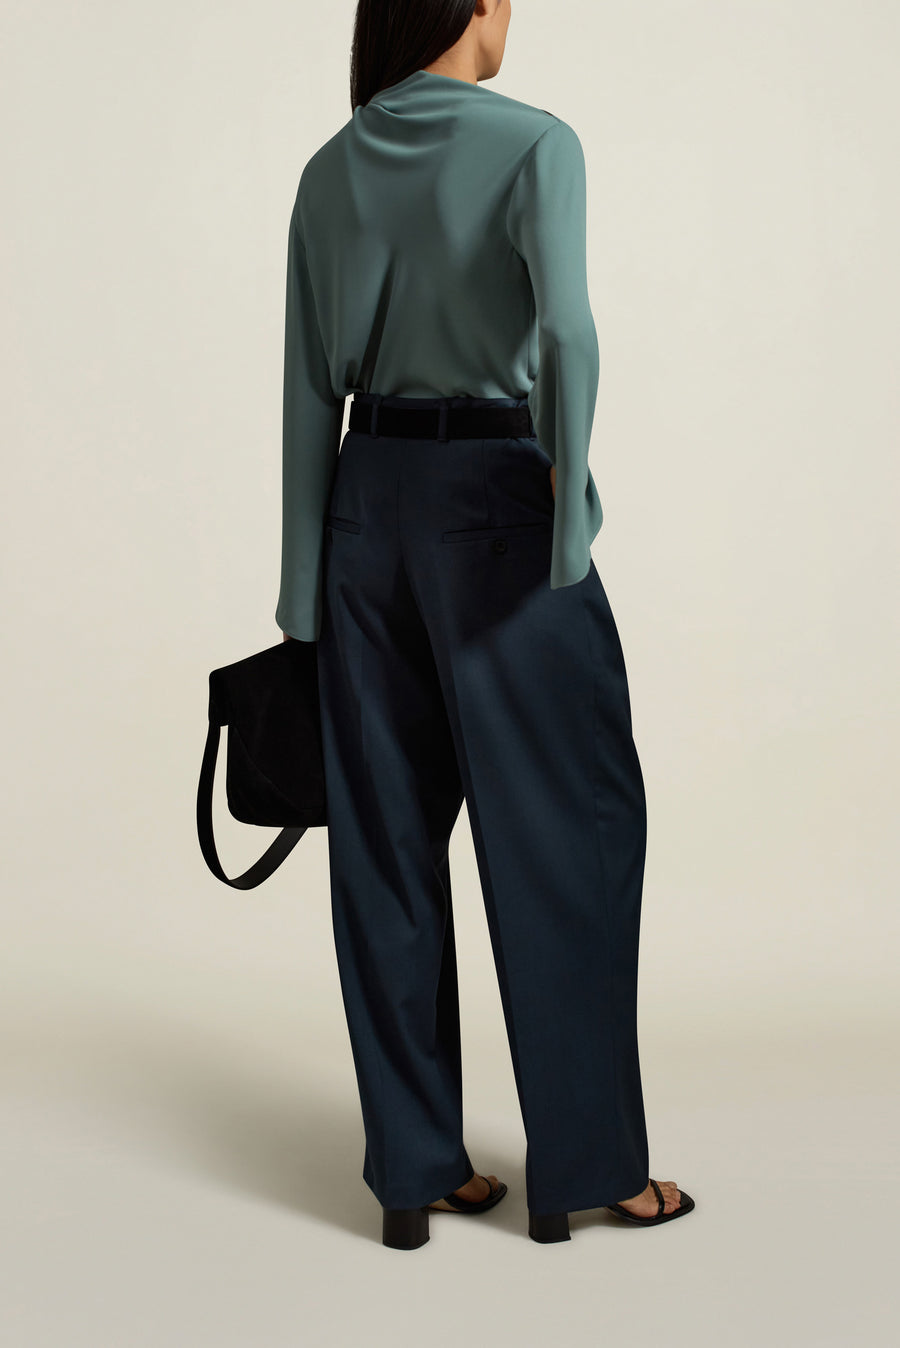 Houghton Pleated Trouser in Teal Tropical Wool